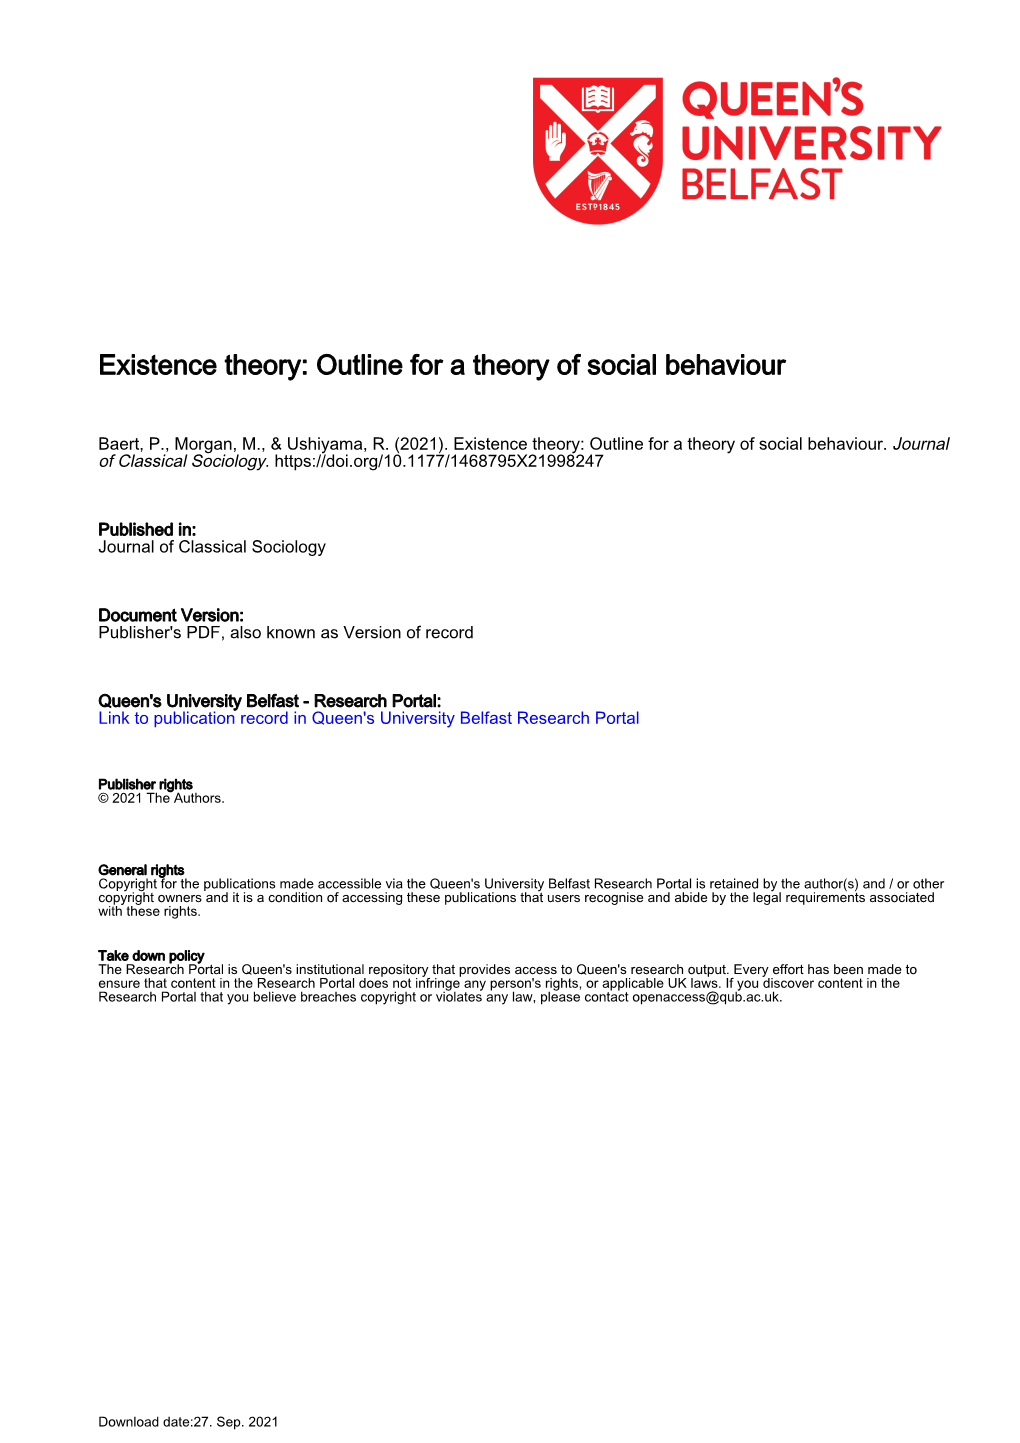 Existence Theory: Outline for a Theory of Social Behaviour